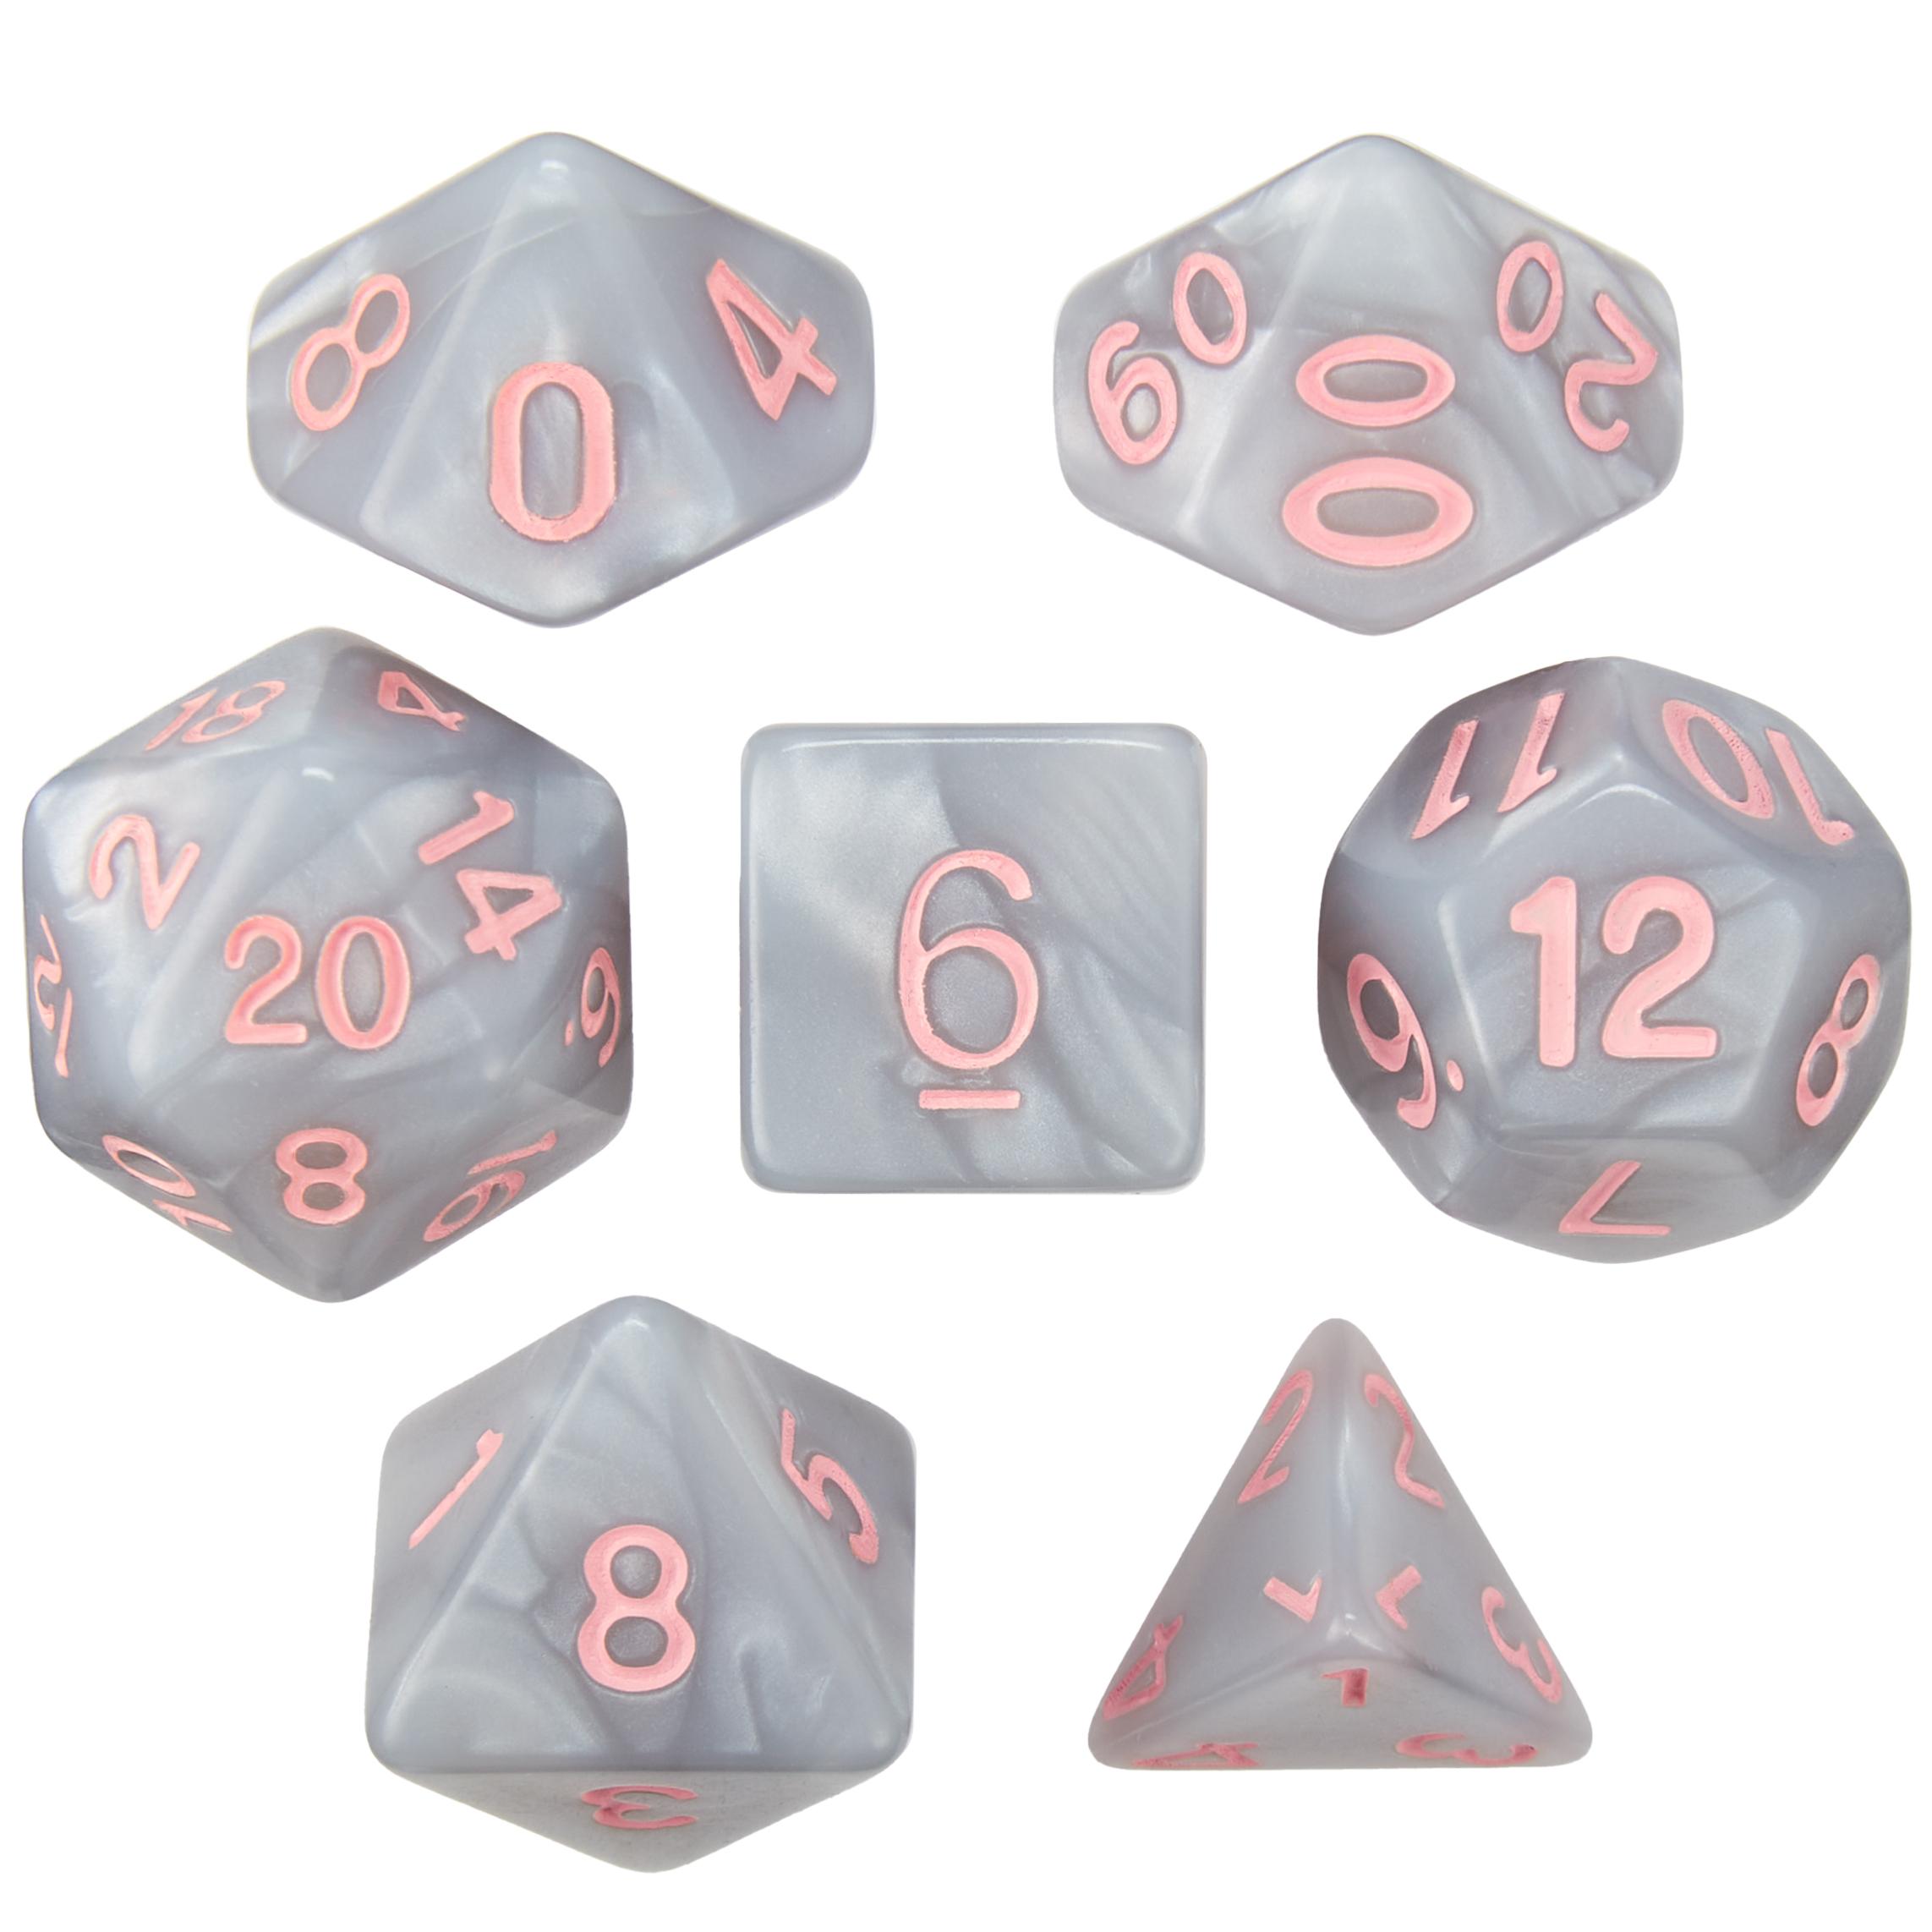 Set of 7 Dice - Fairy Quartz - Pearlized Gray with Pink Paint